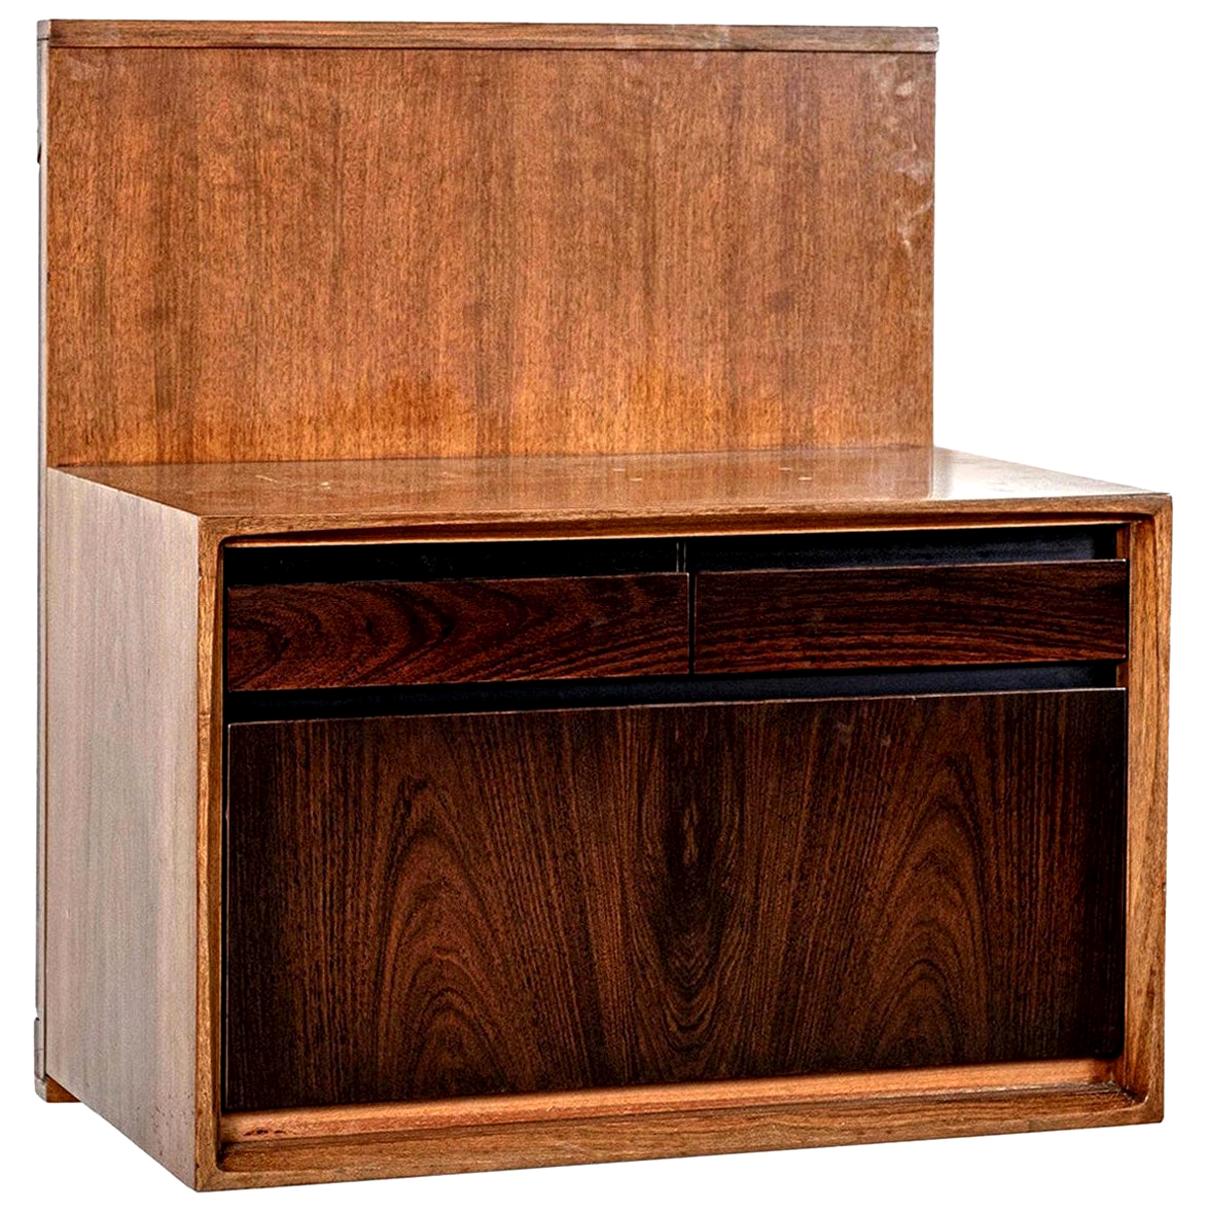 Three De Coene Wall-Mounted Consoles in Walnut and Rosewood